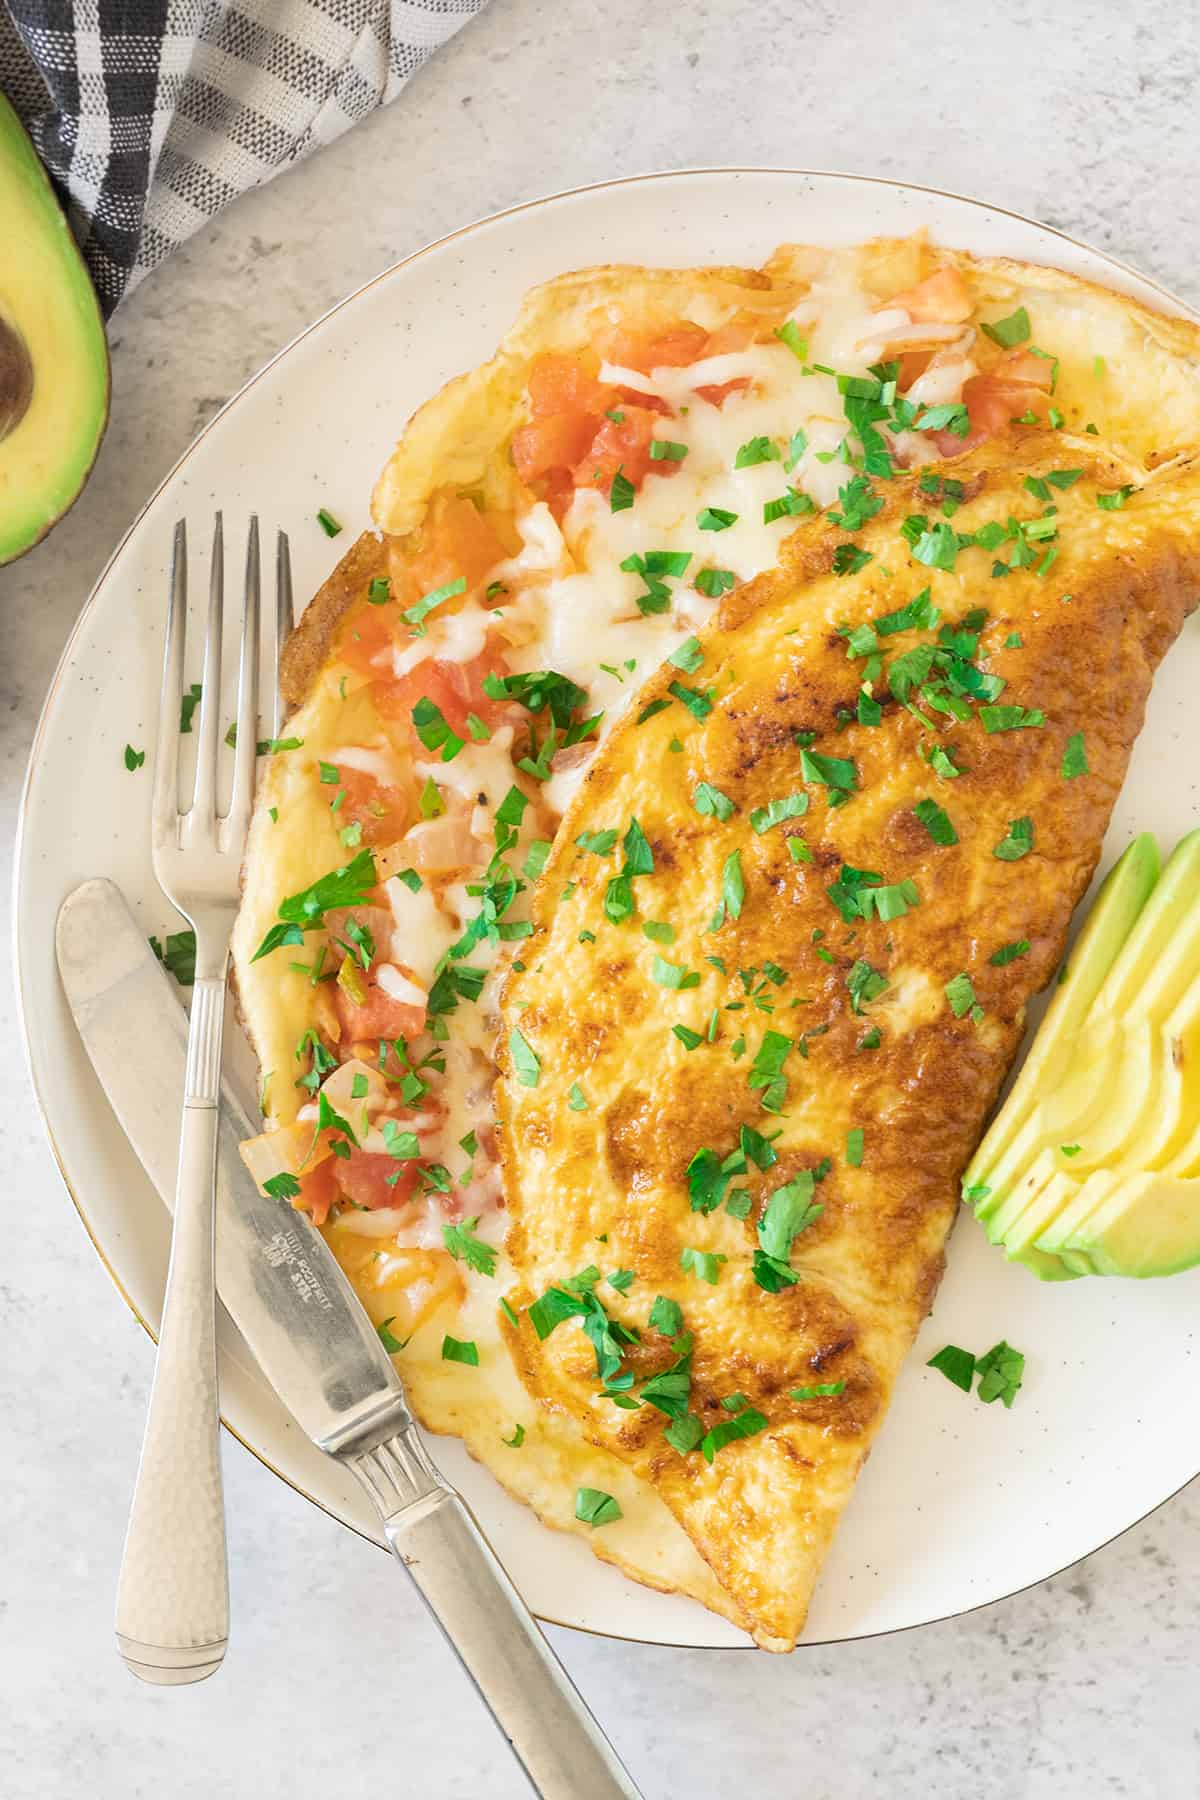 A Mexican Omelette served on a white plate next to avocado slices.